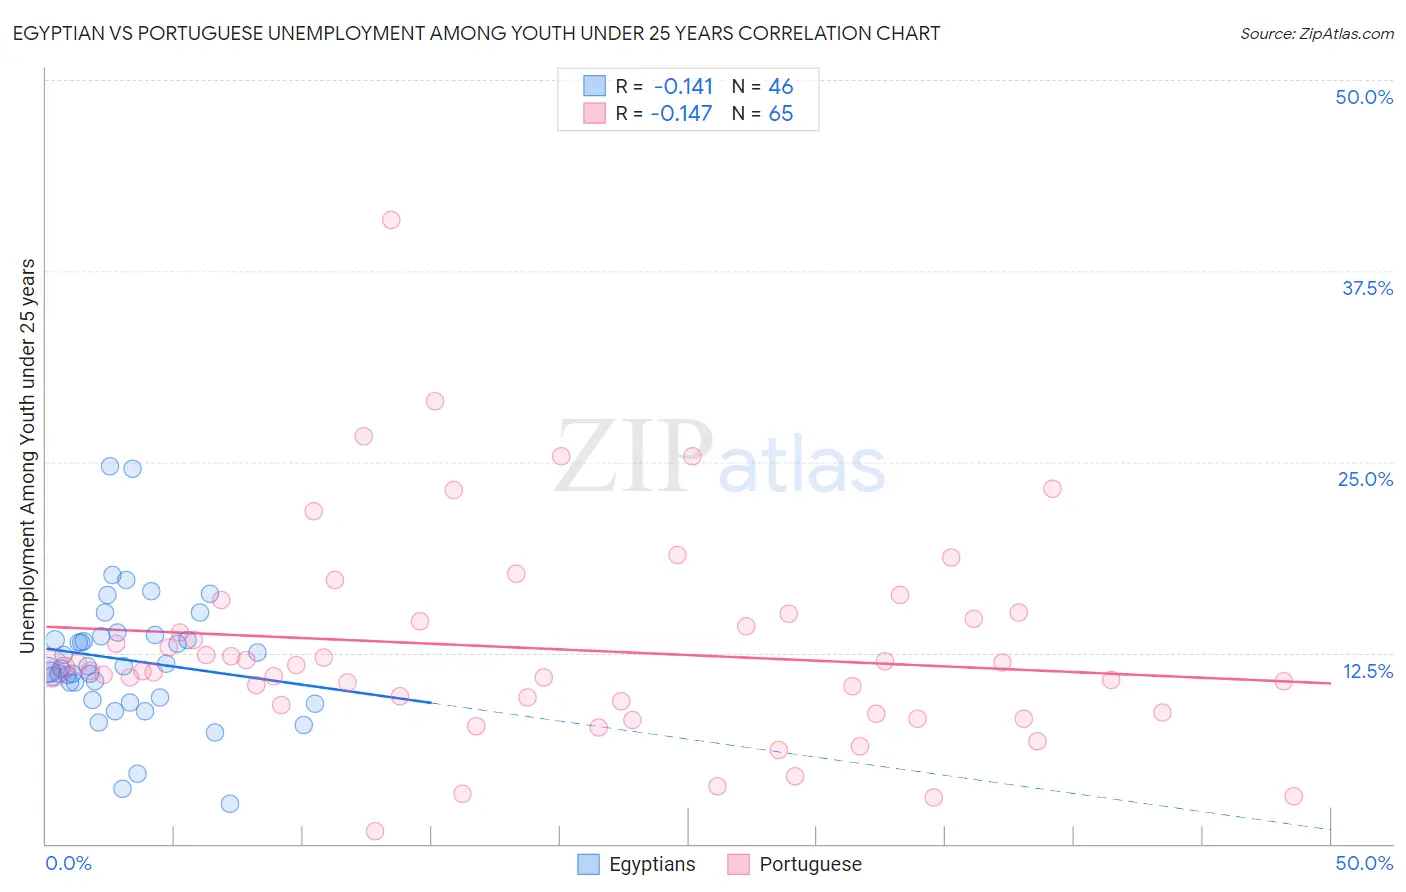 Egyptian vs Portuguese Unemployment Among Youth under 25 years